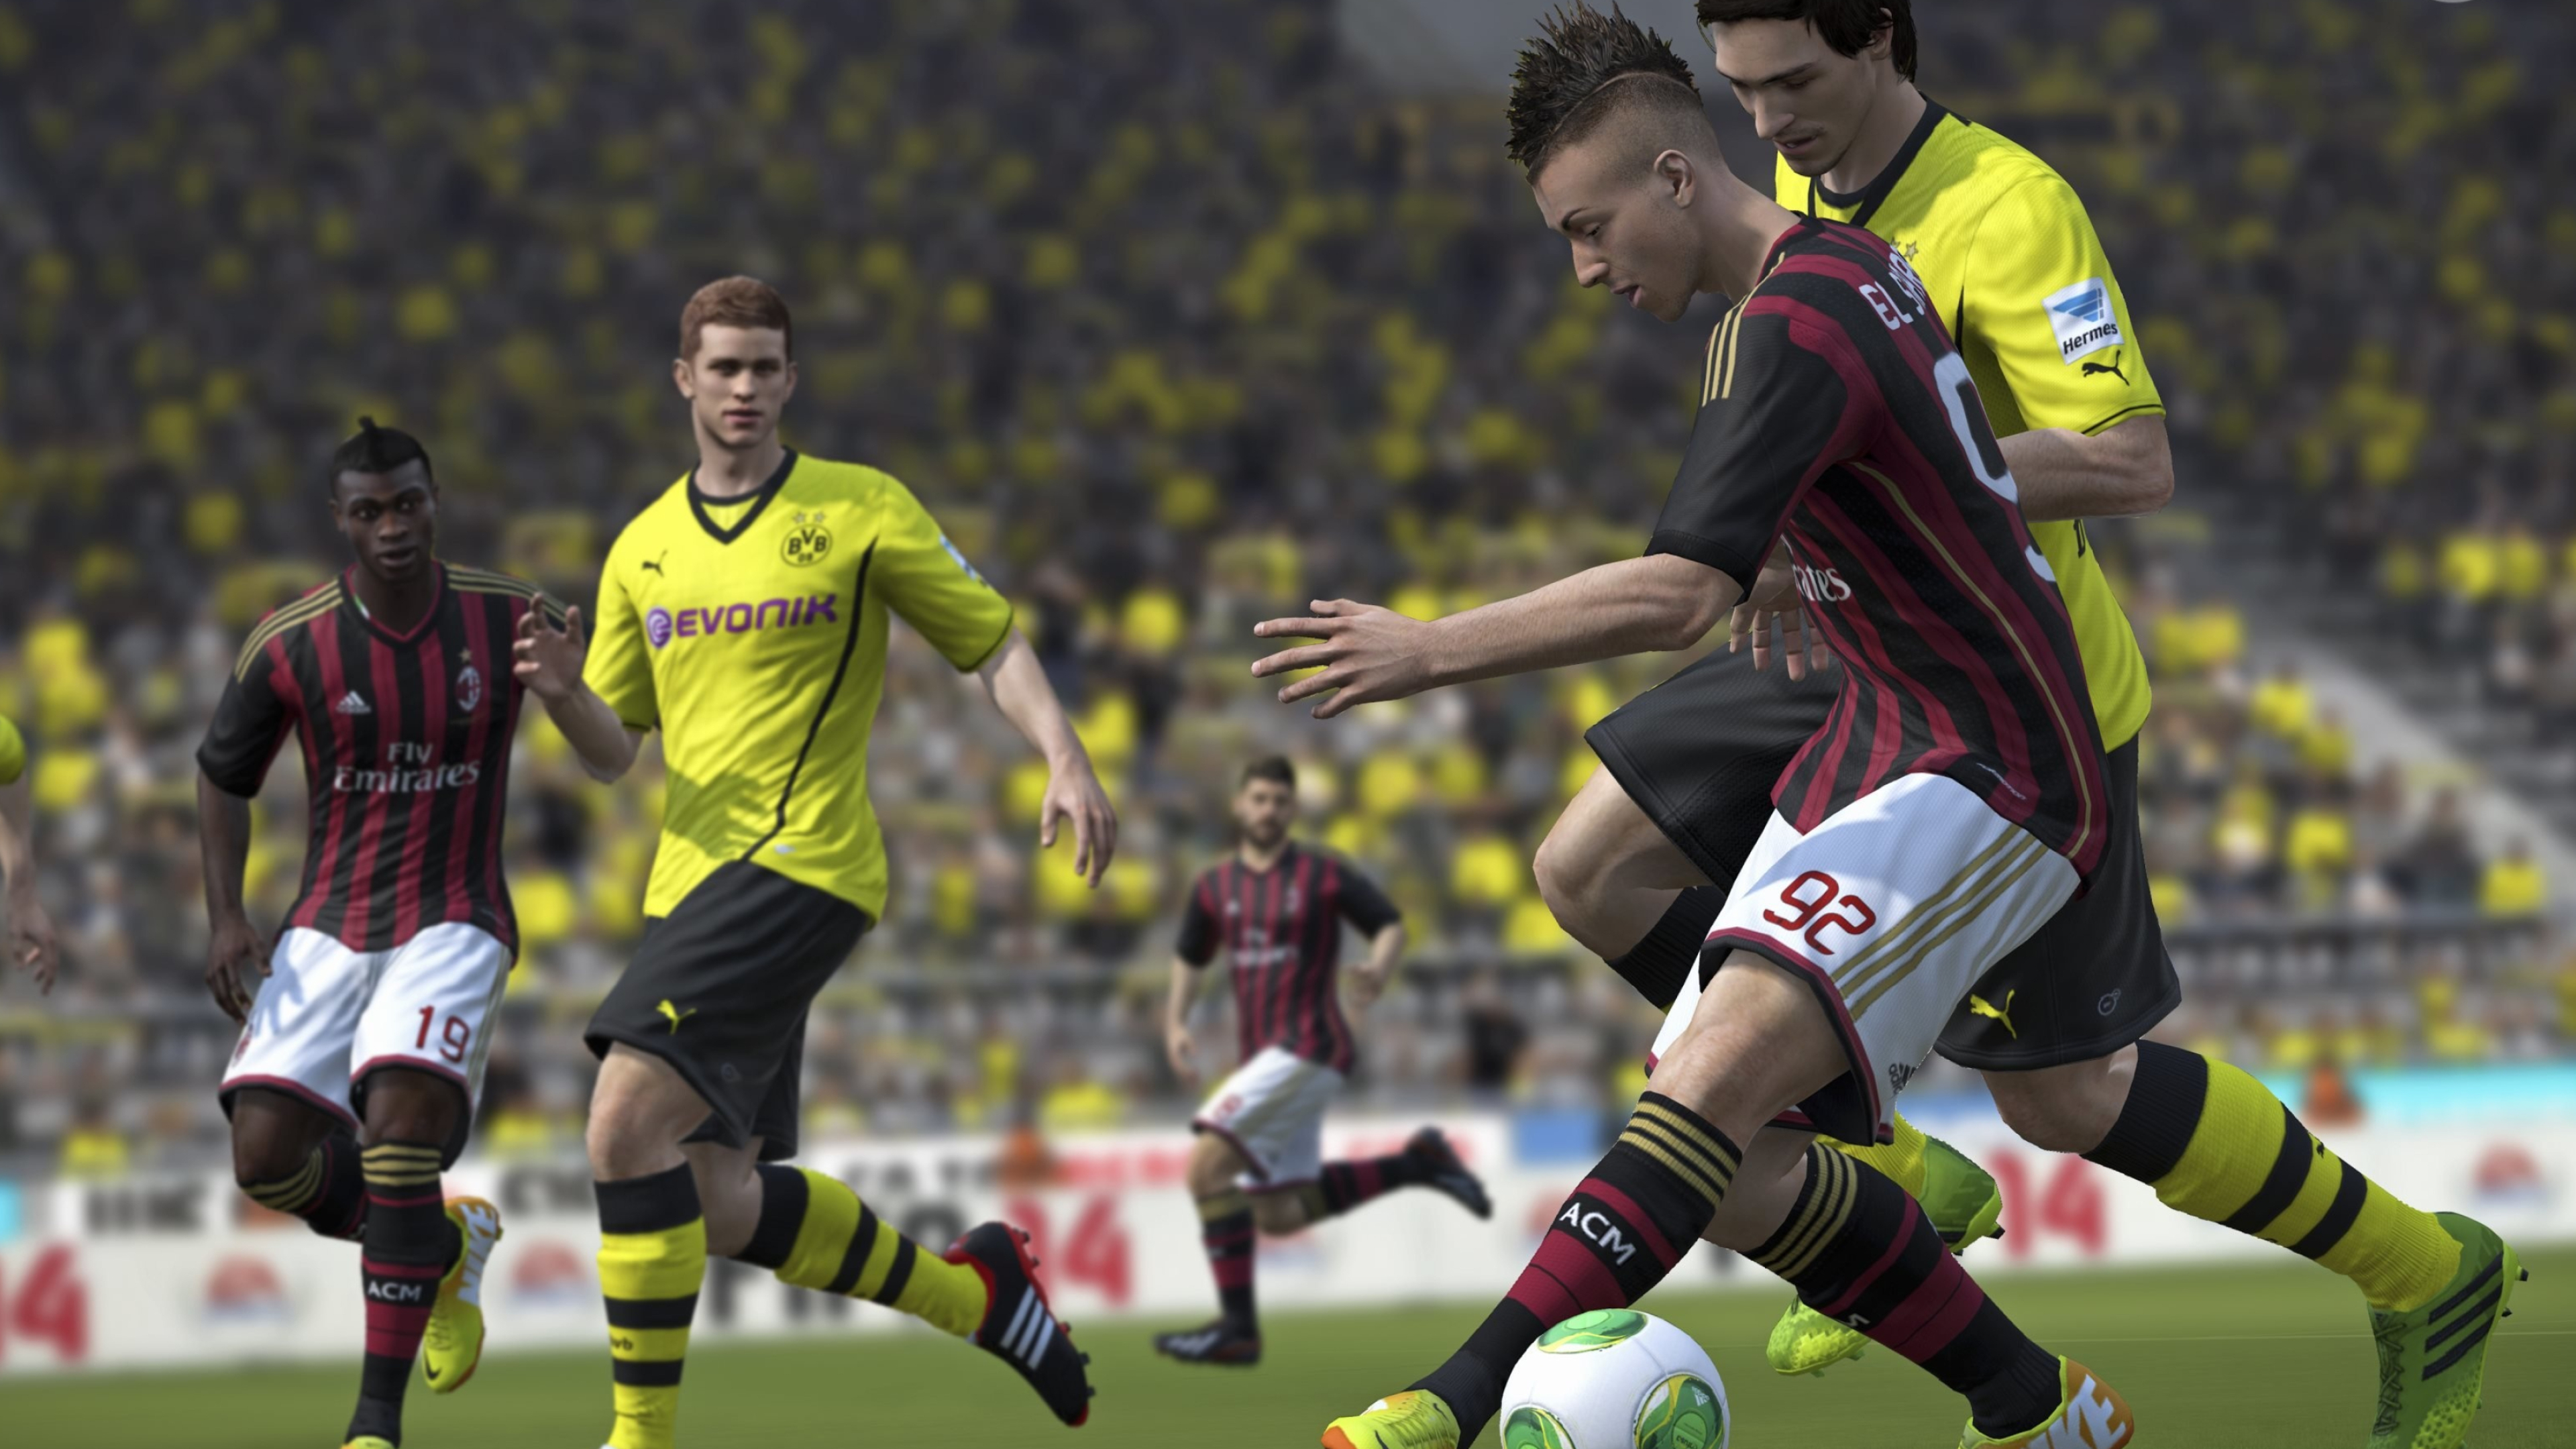 FIFA Soccer (Game): Ultimate team, FUT, Features 33 fully licensed leagues. 3840x2160 4K Wallpaper.